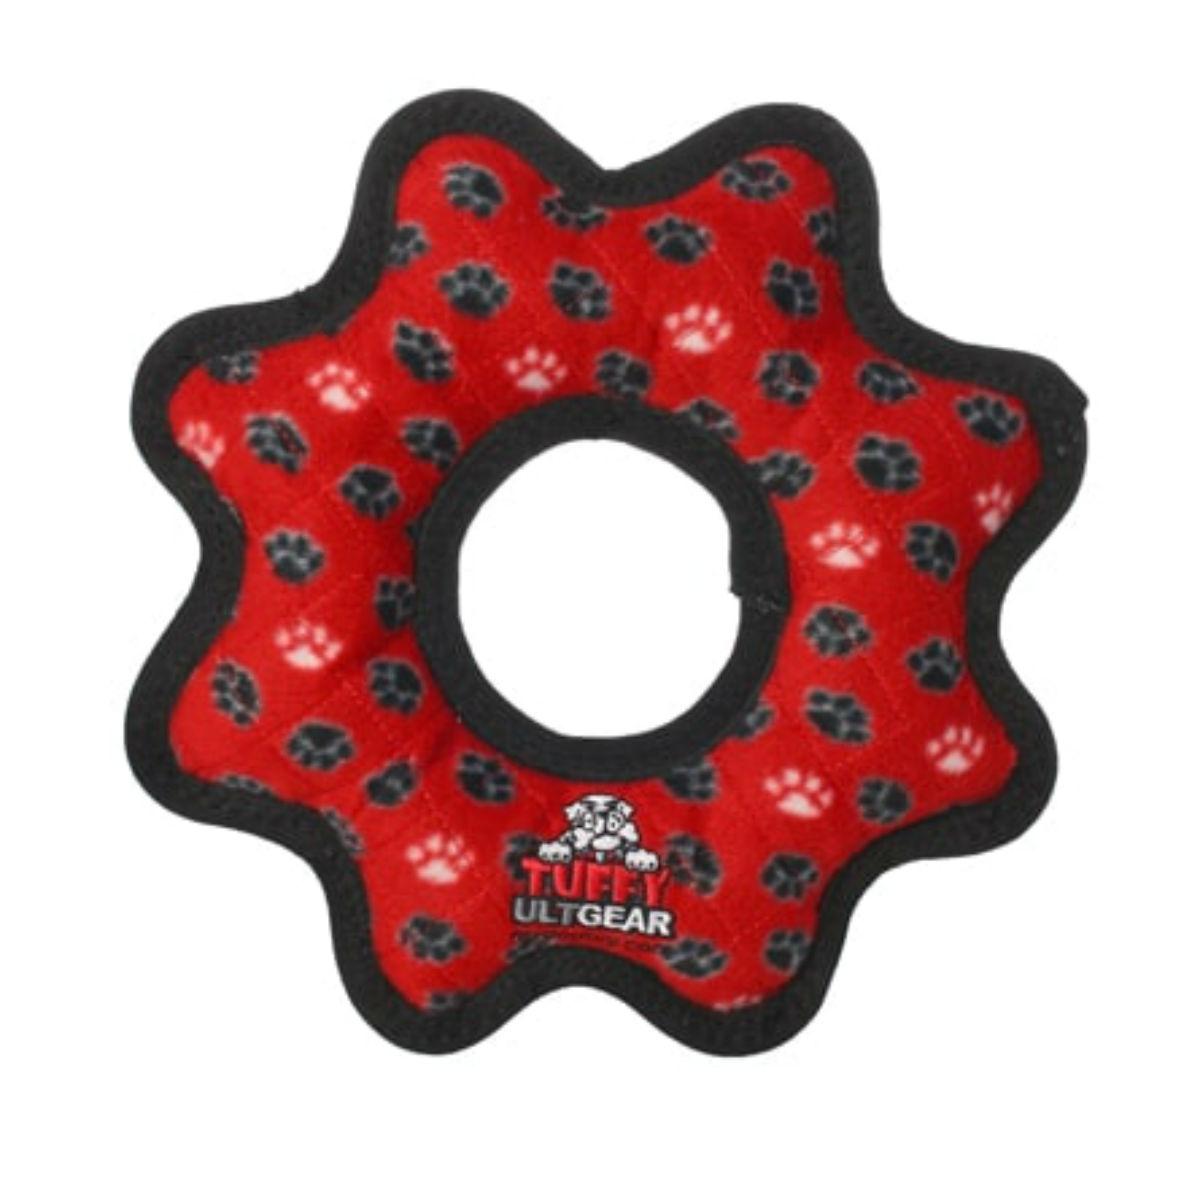 Tuffy Ultimate Gear Dog Toy - Red Paw Print